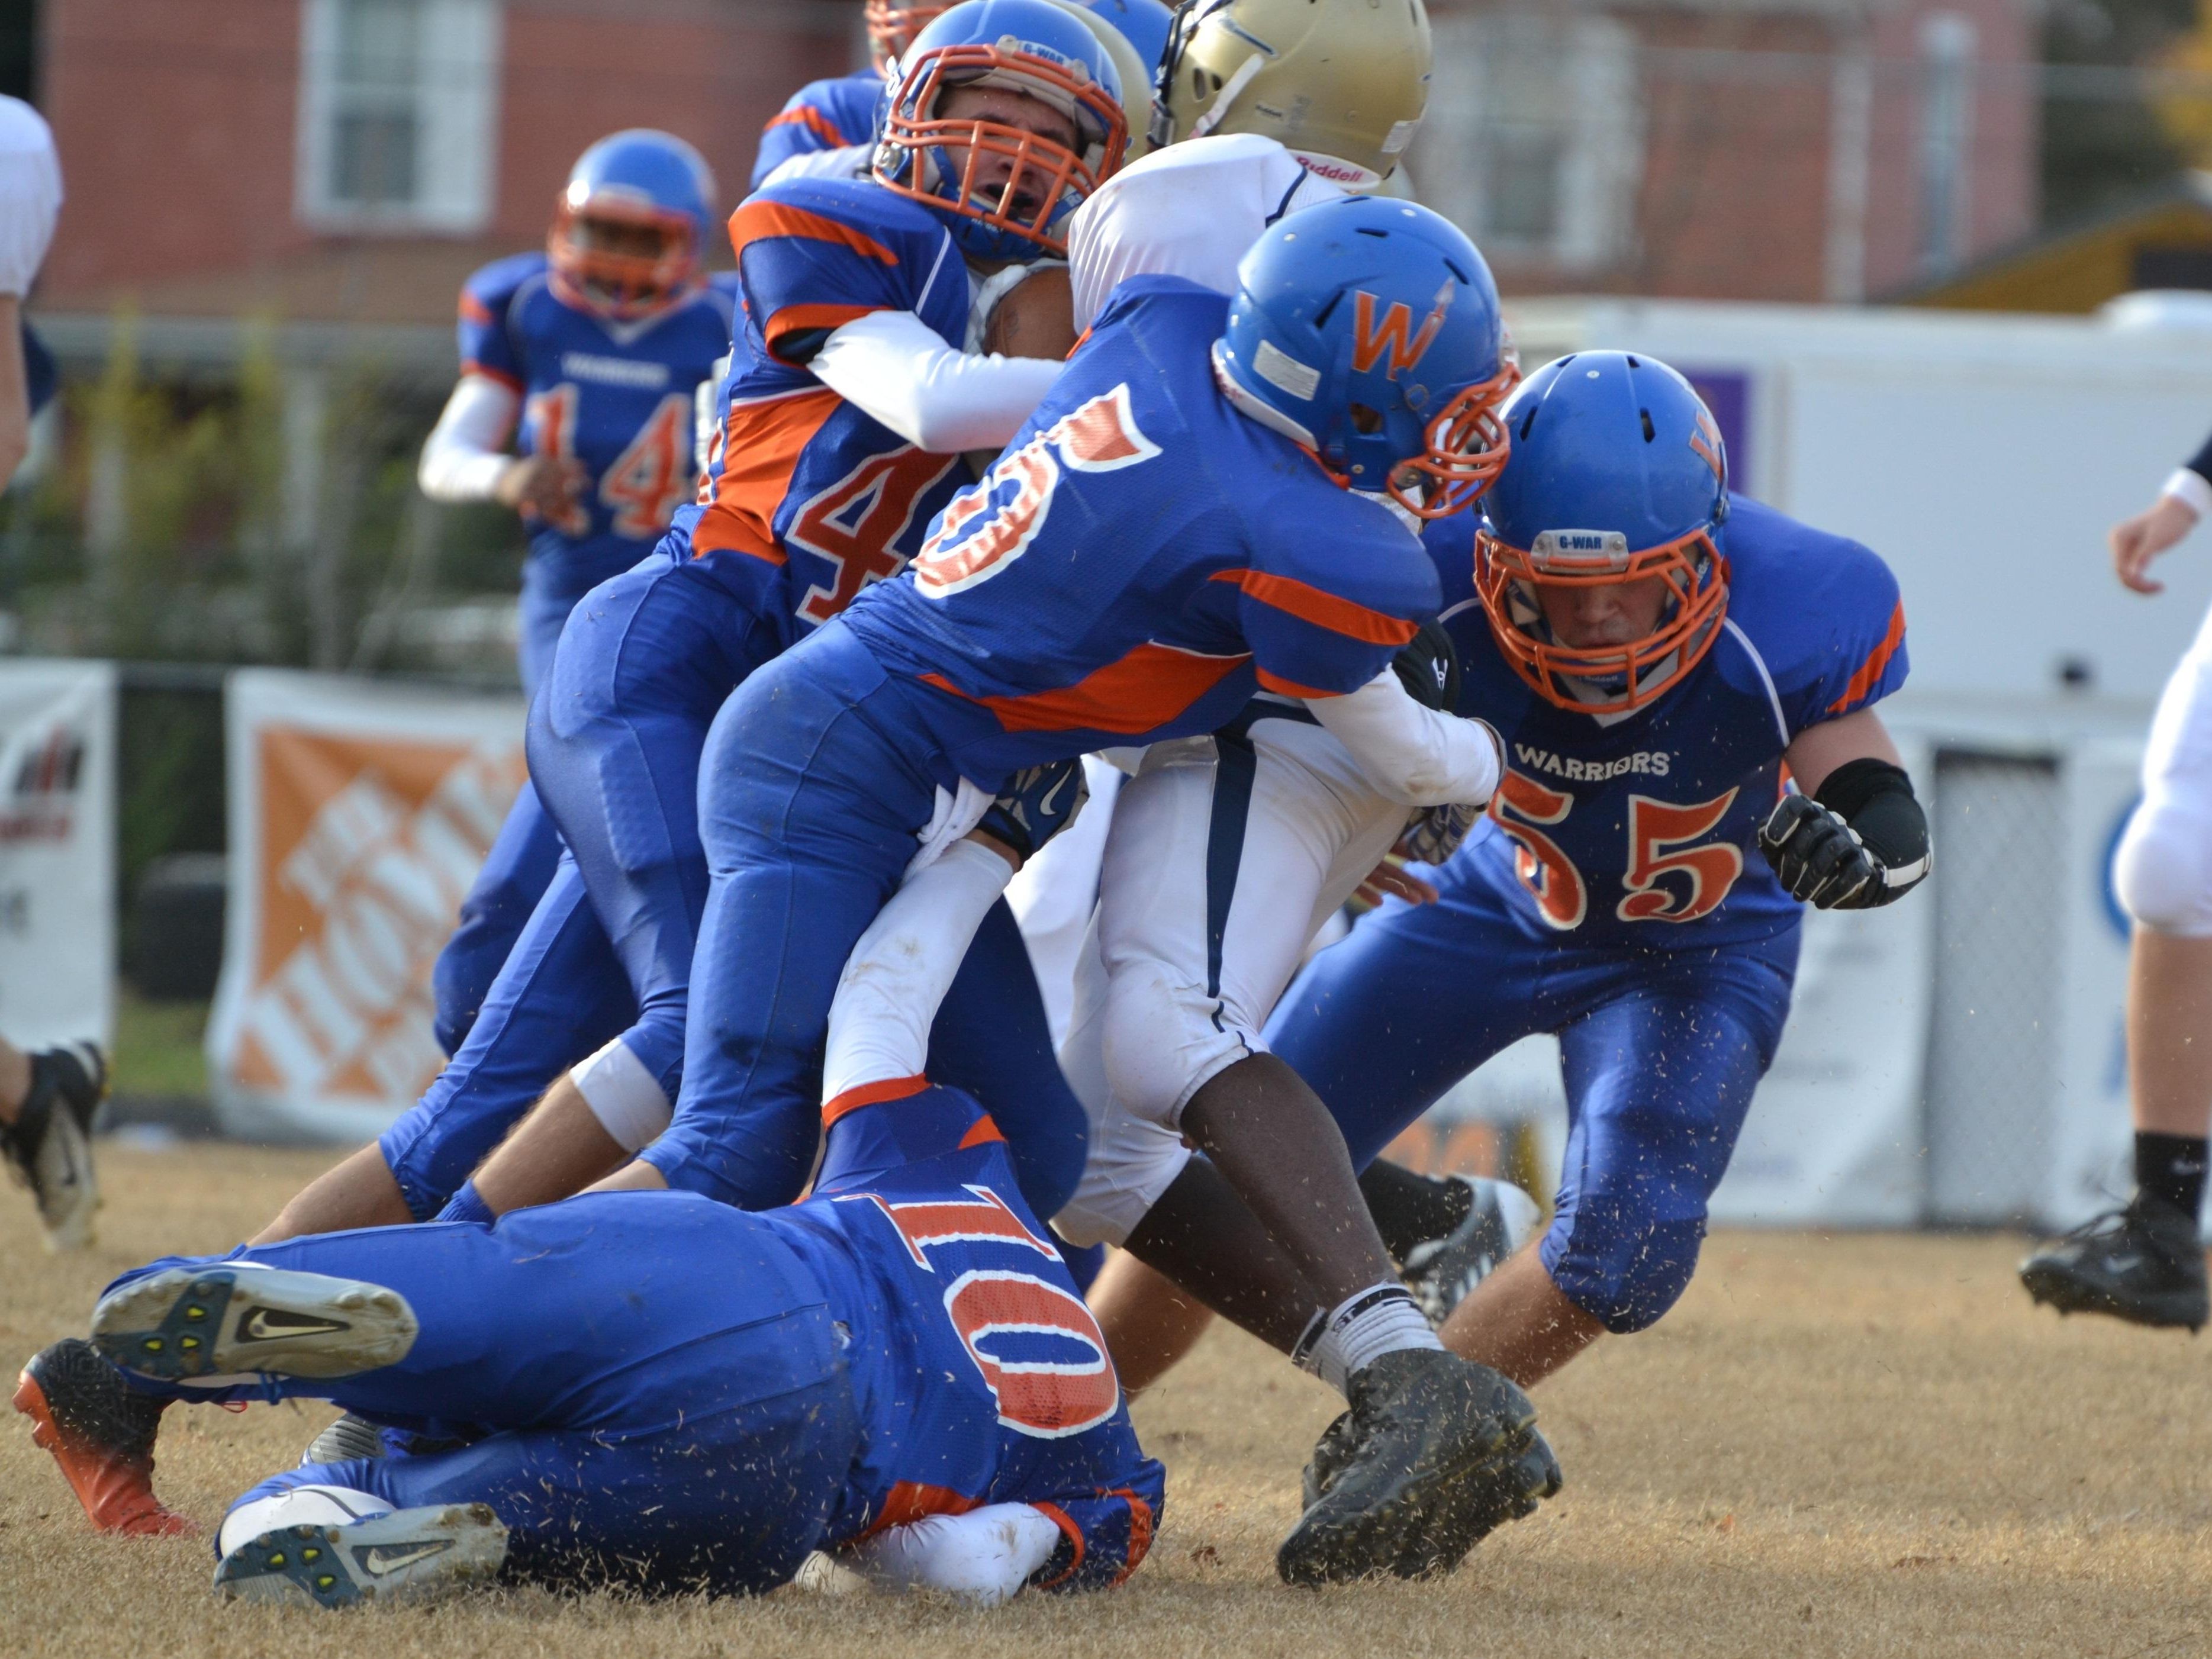 Thomas Musselman, center, Spencer Eckert, right, and Austin Mayo, bottom, wrap up a Victory Christian Academy ball carrier on Saturday during the Warriors final varsity football game of the season. The Warriors won 12-8, finishing out an abbreviated 2-2 campaign, which saw a win against Rappahannock and losses against Massanutten Military Academy and Craig County.